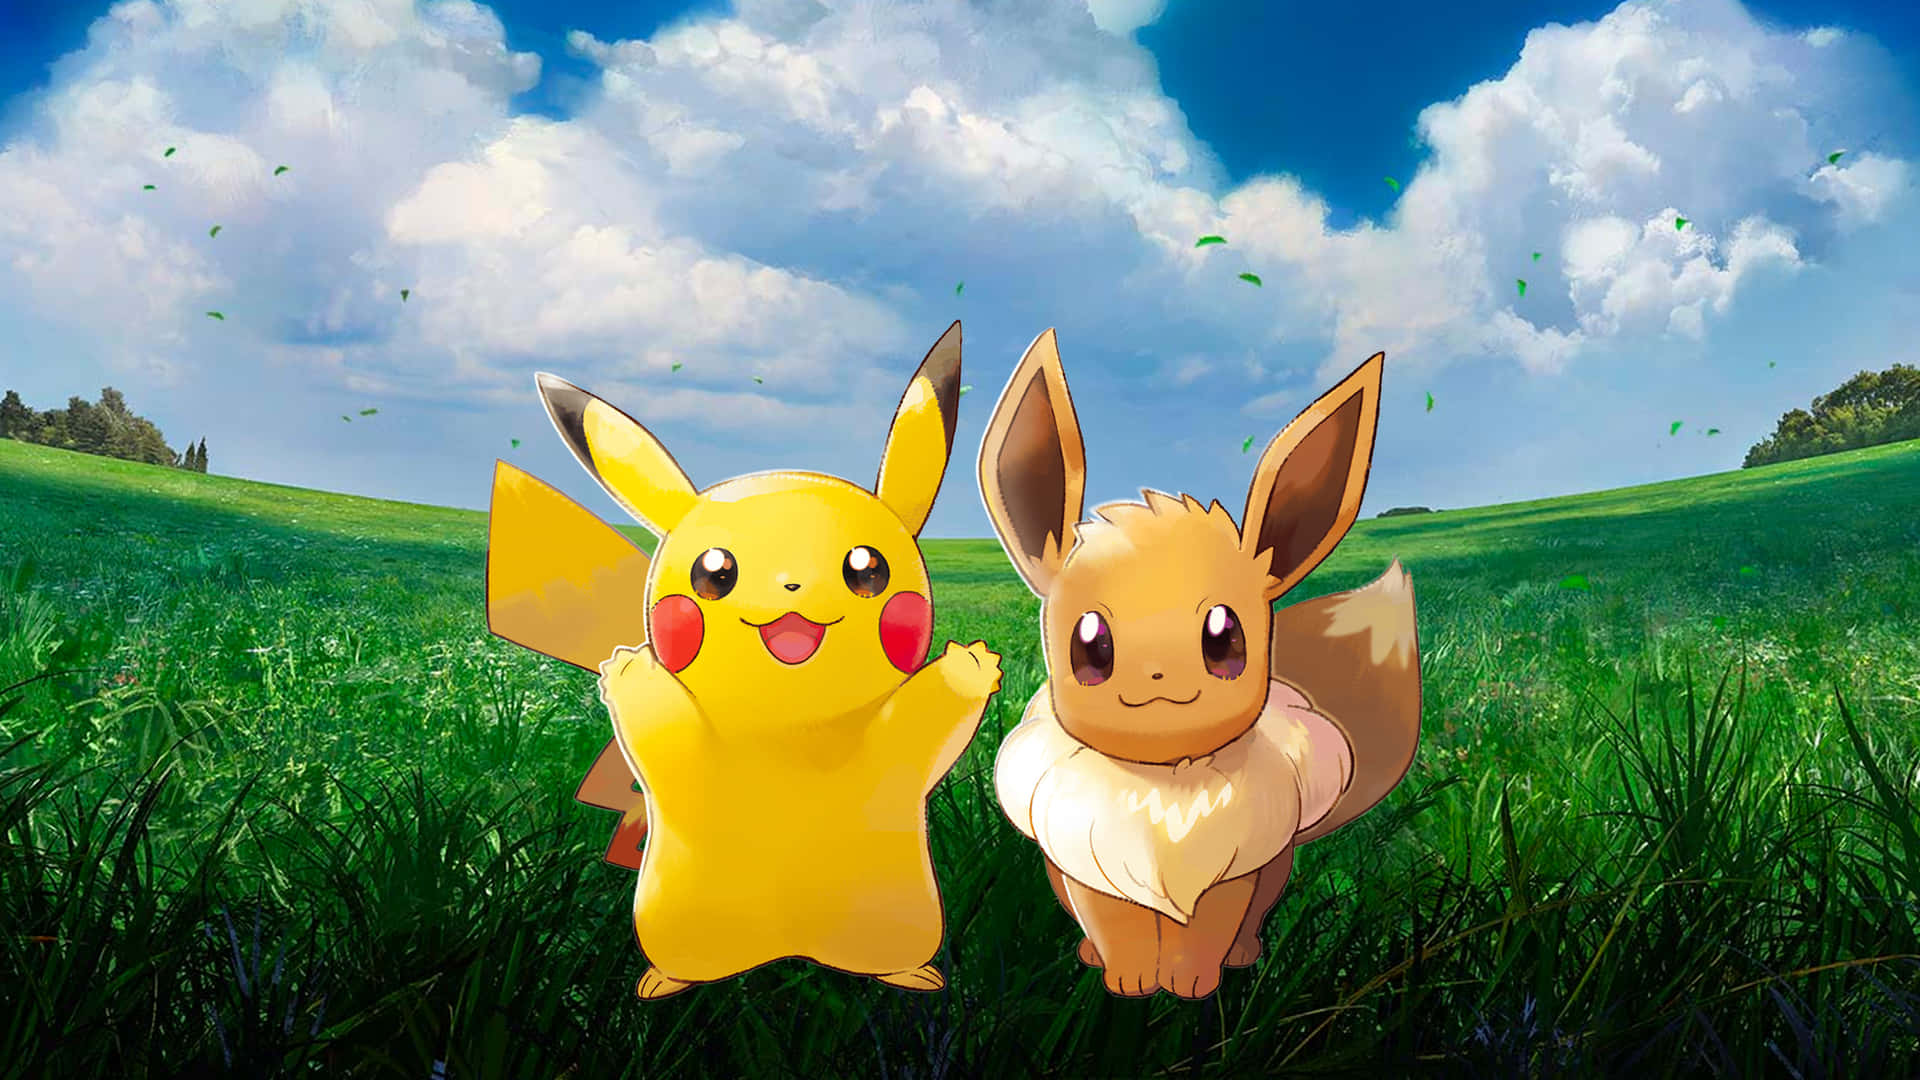 Two of the most adorable Pokémon side by side! Wallpaper